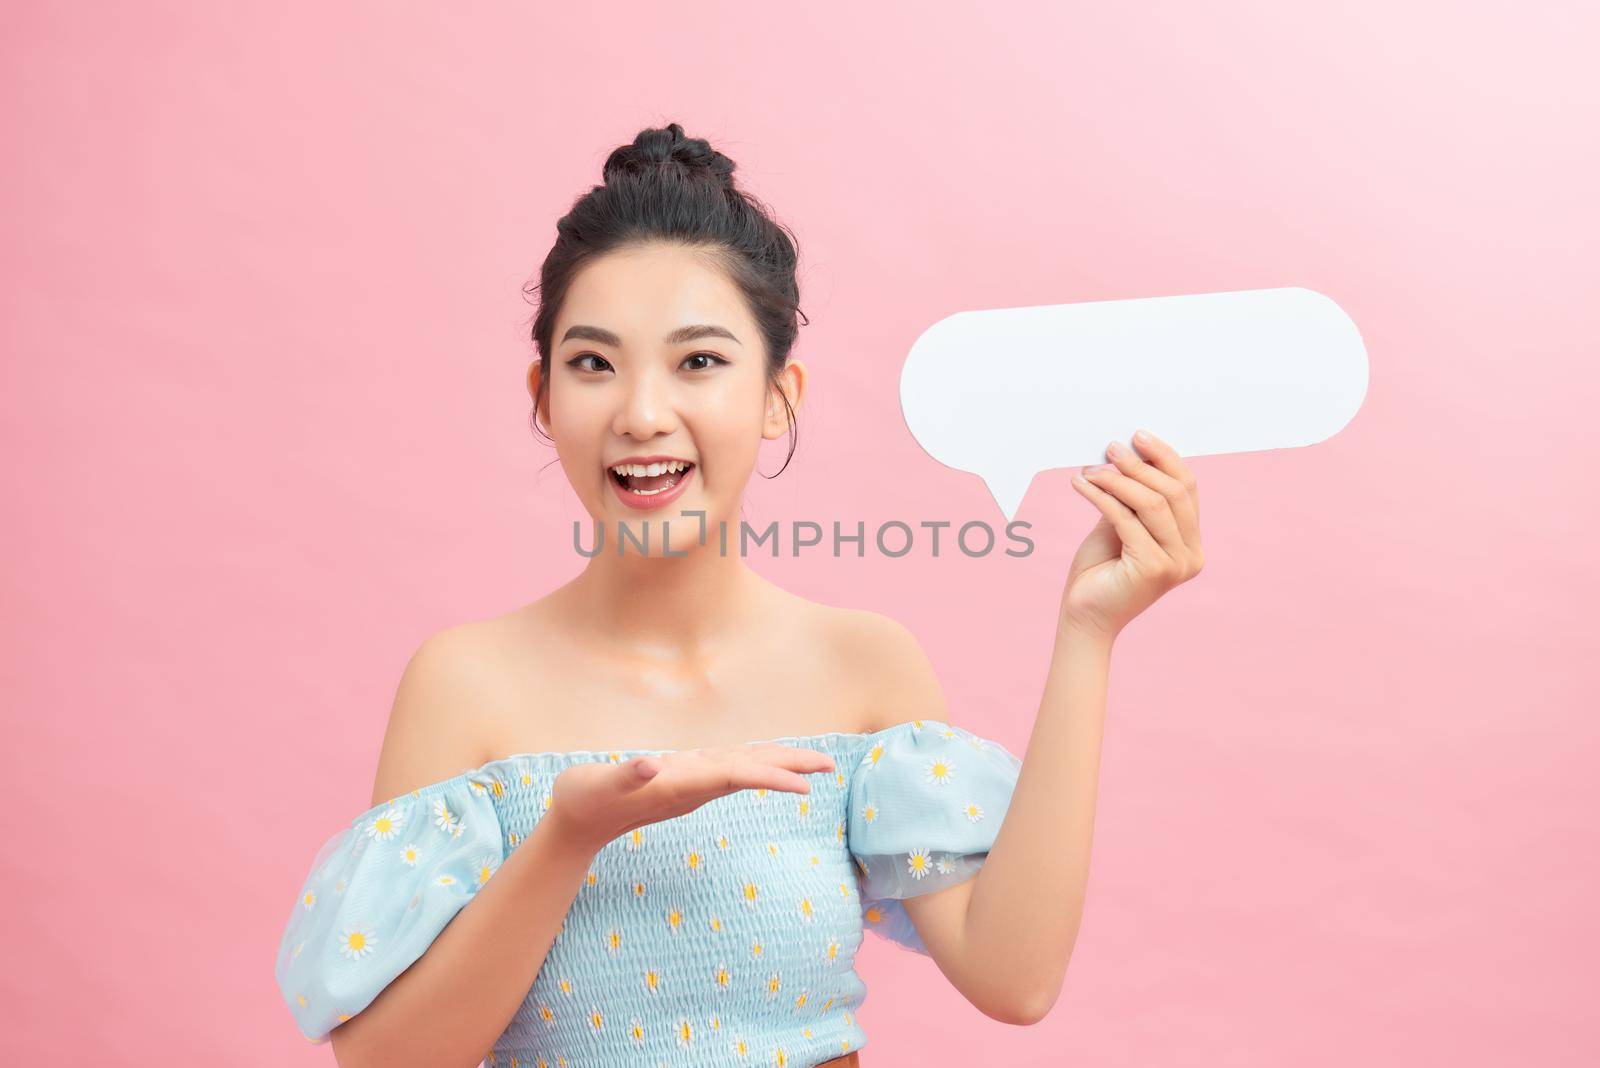 Surprised happy woman holding blank speech bubble and looking at the camera over pink background